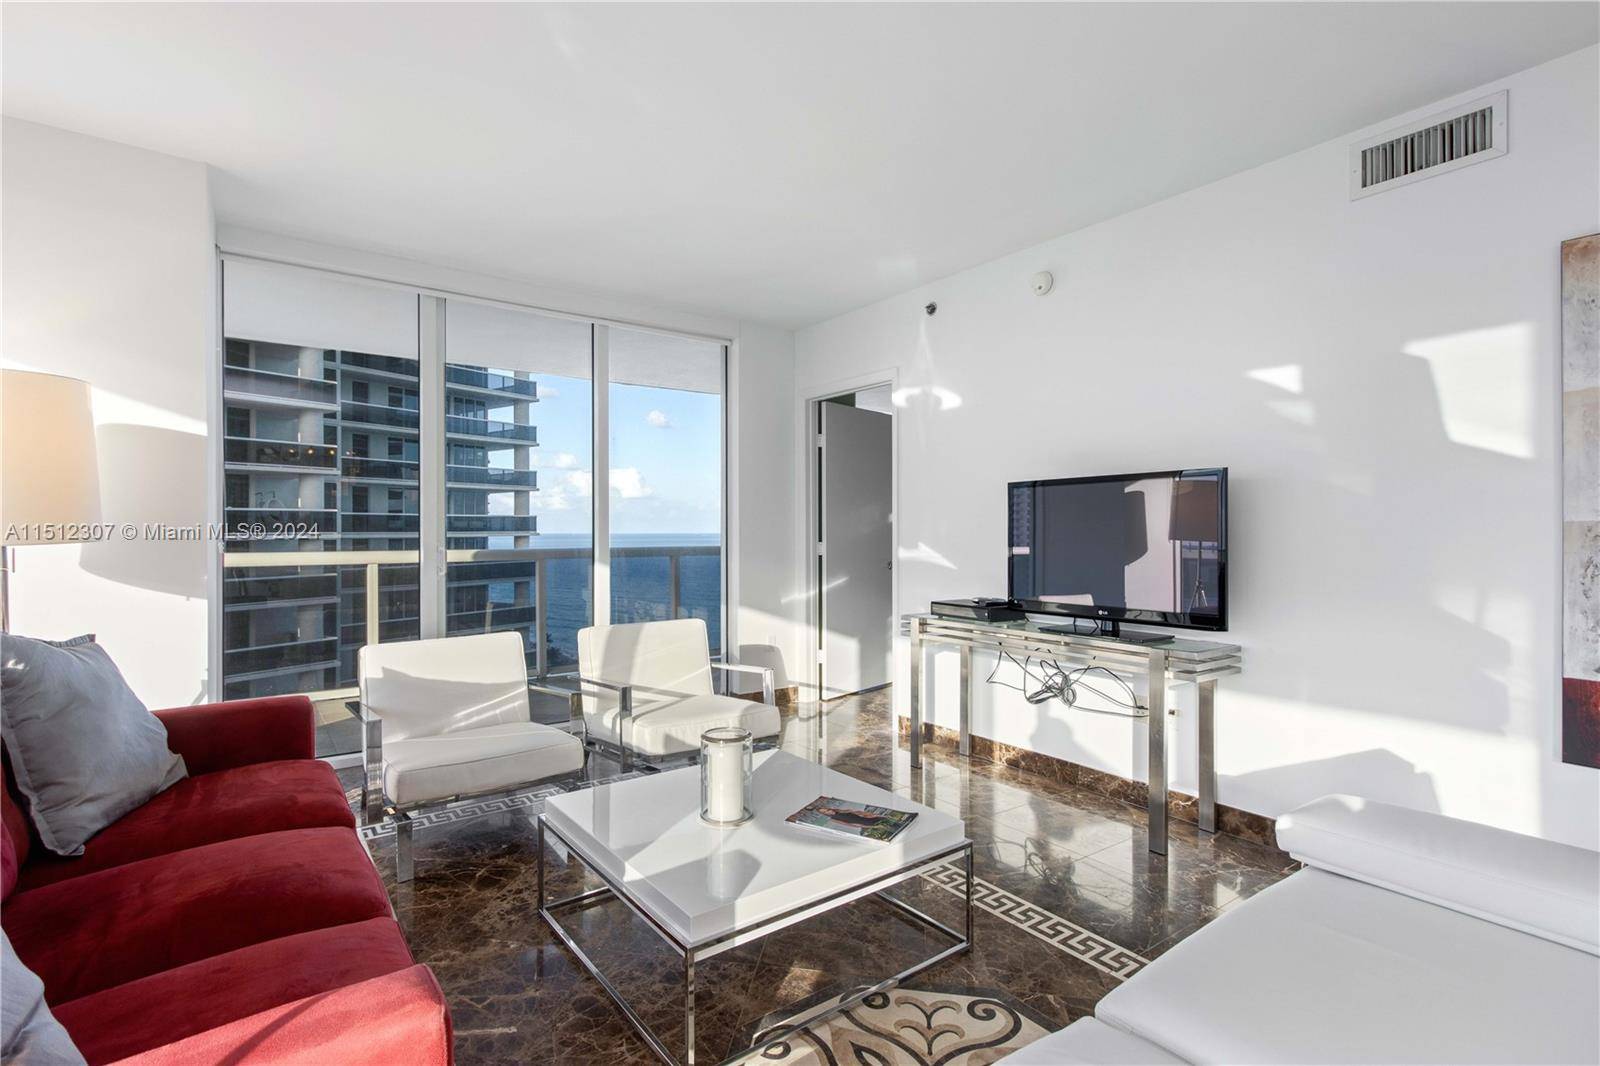 Enjoy the stunning views of the ocean and the intracoastal from this gorgeous 2 2 NW corner unit.